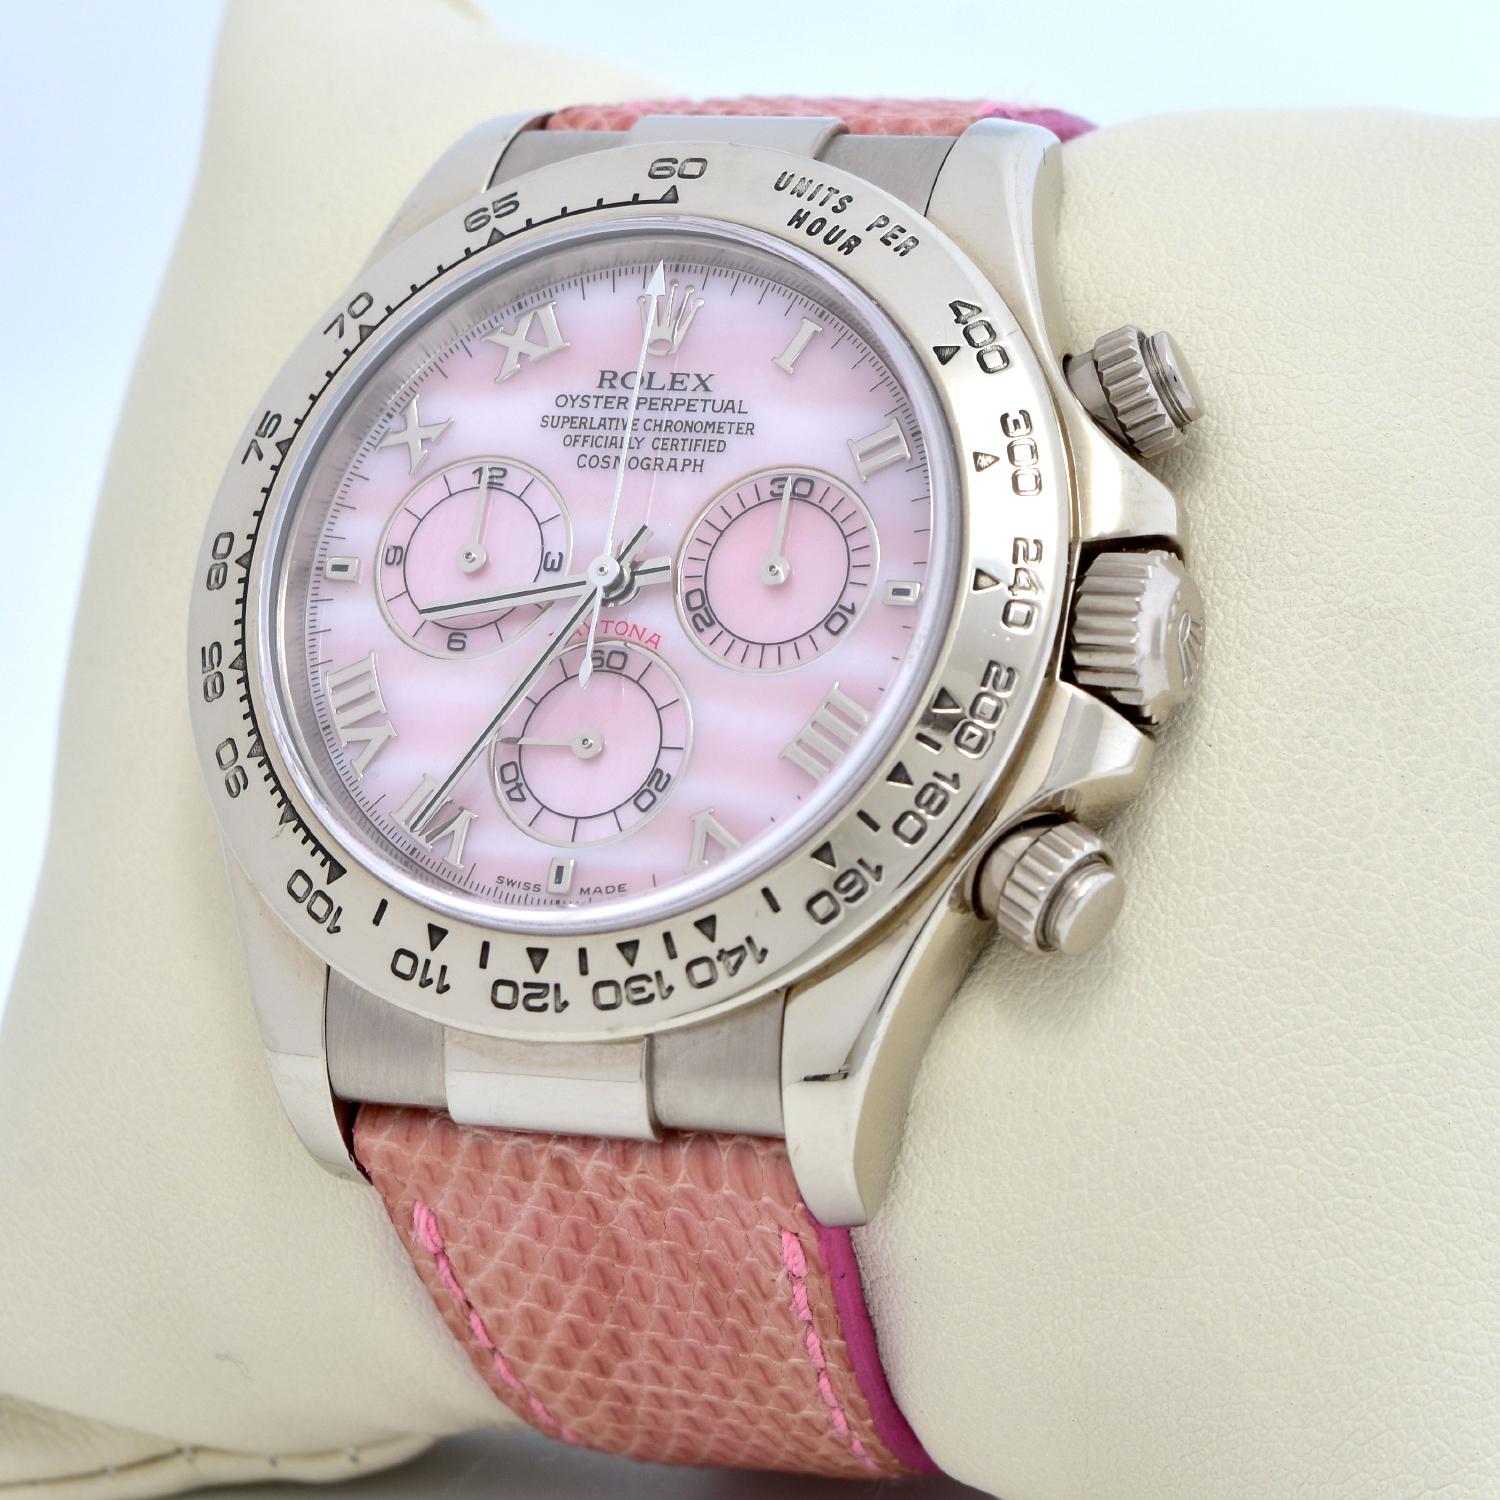 Case: Fantastic 40mm white gold case

Dial: Gorgeous and rare pink mother of pearl Daytona Beach iteration.

Bracelet: Fitted on a pink leather Rolex strap put together by a Rolex white gold deployment

Accessories: Box

Notes: Highly sought after